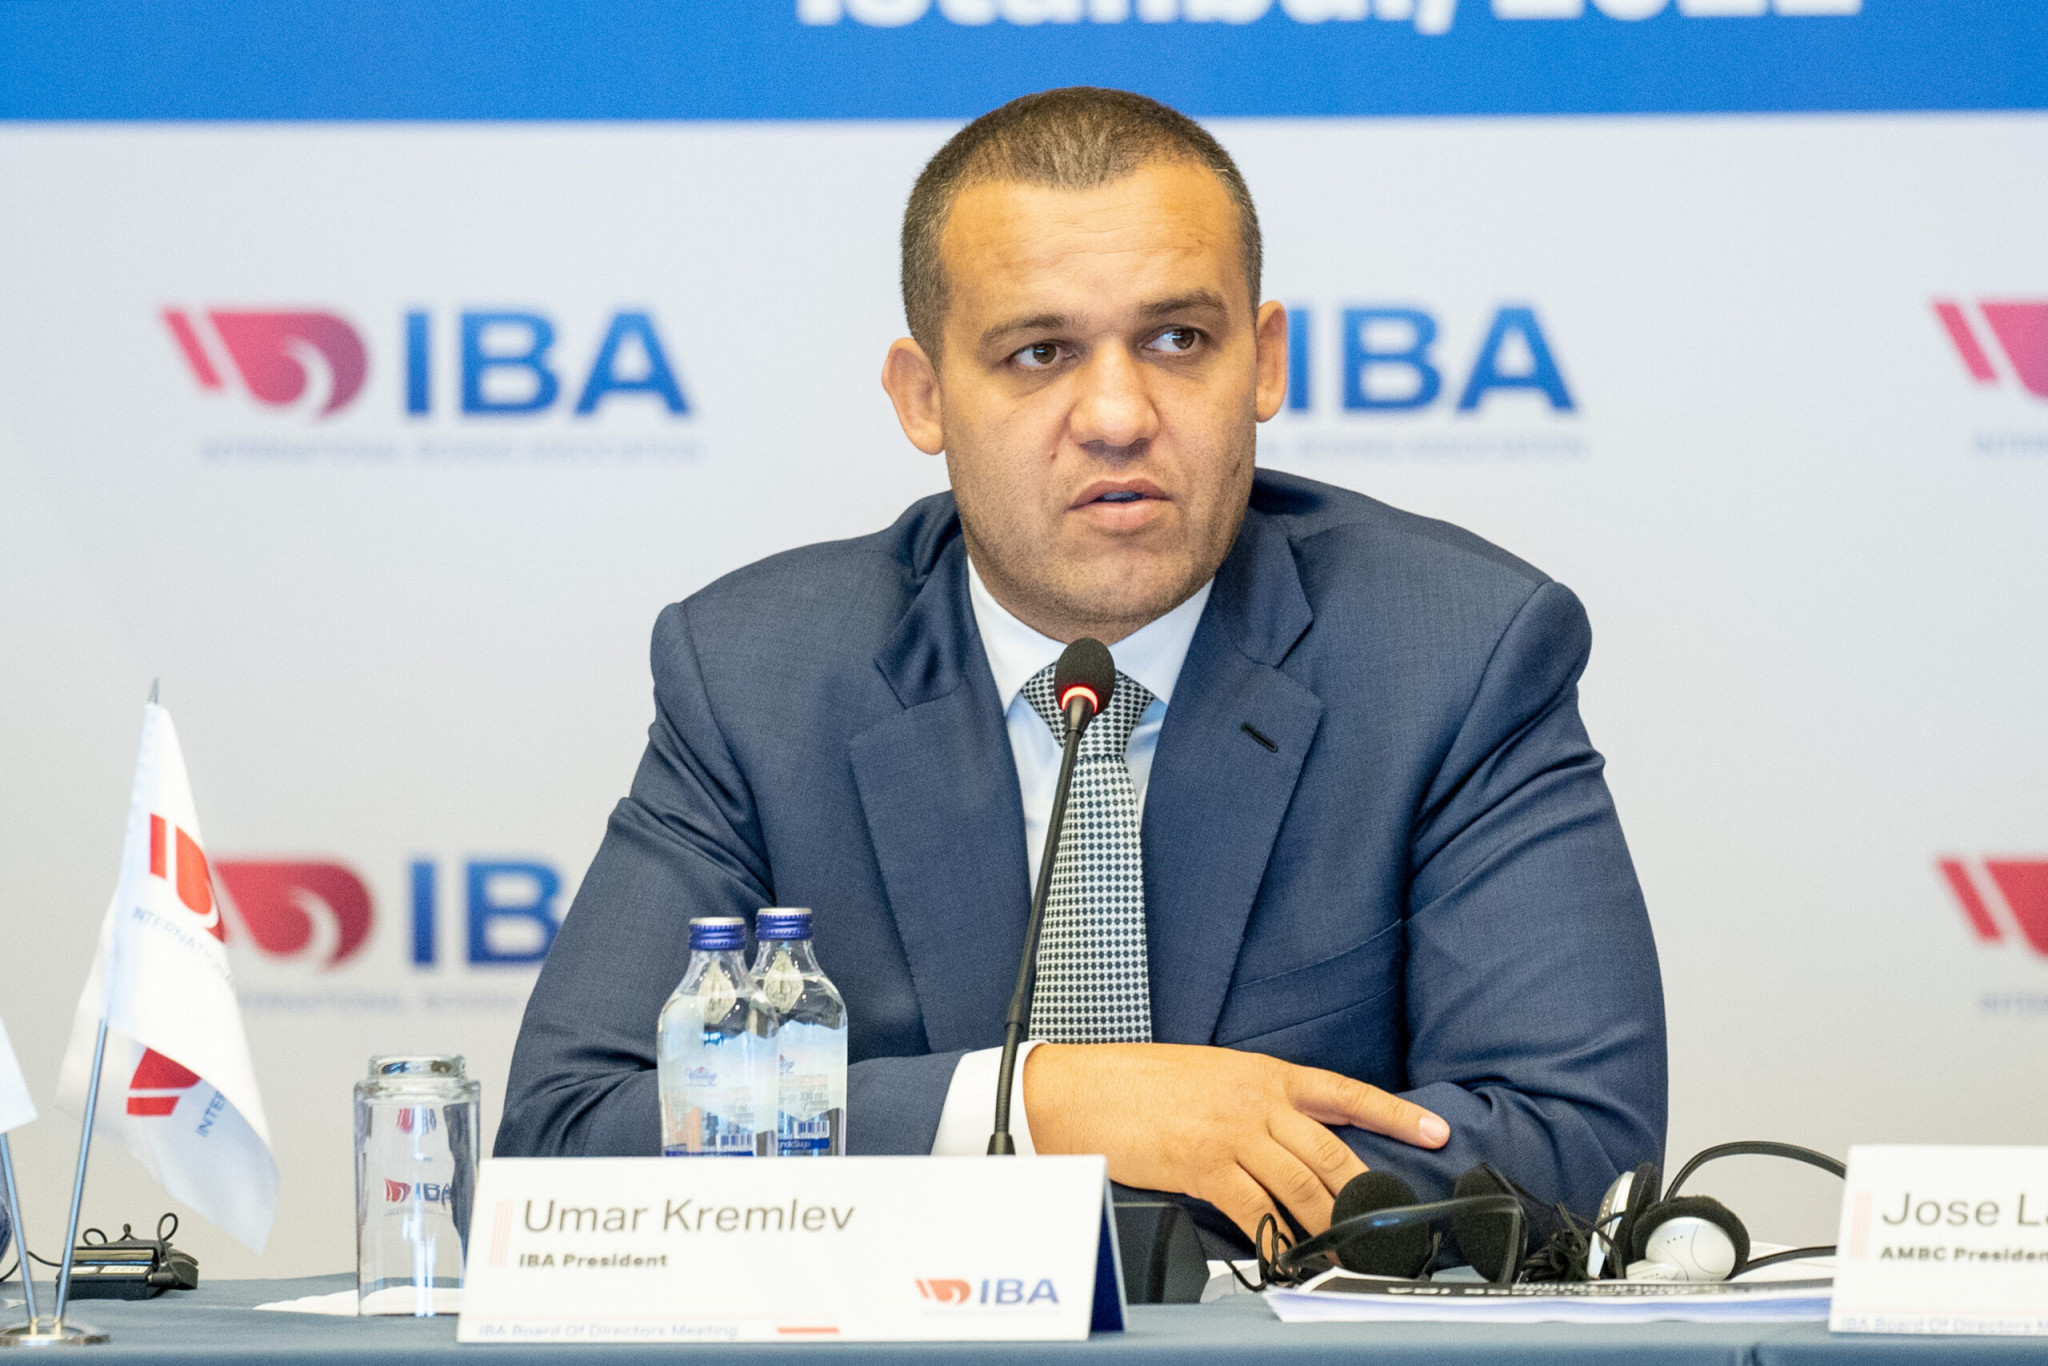  IBA President Umar Kremlev has been issued a letter by the IOC which questioned the 